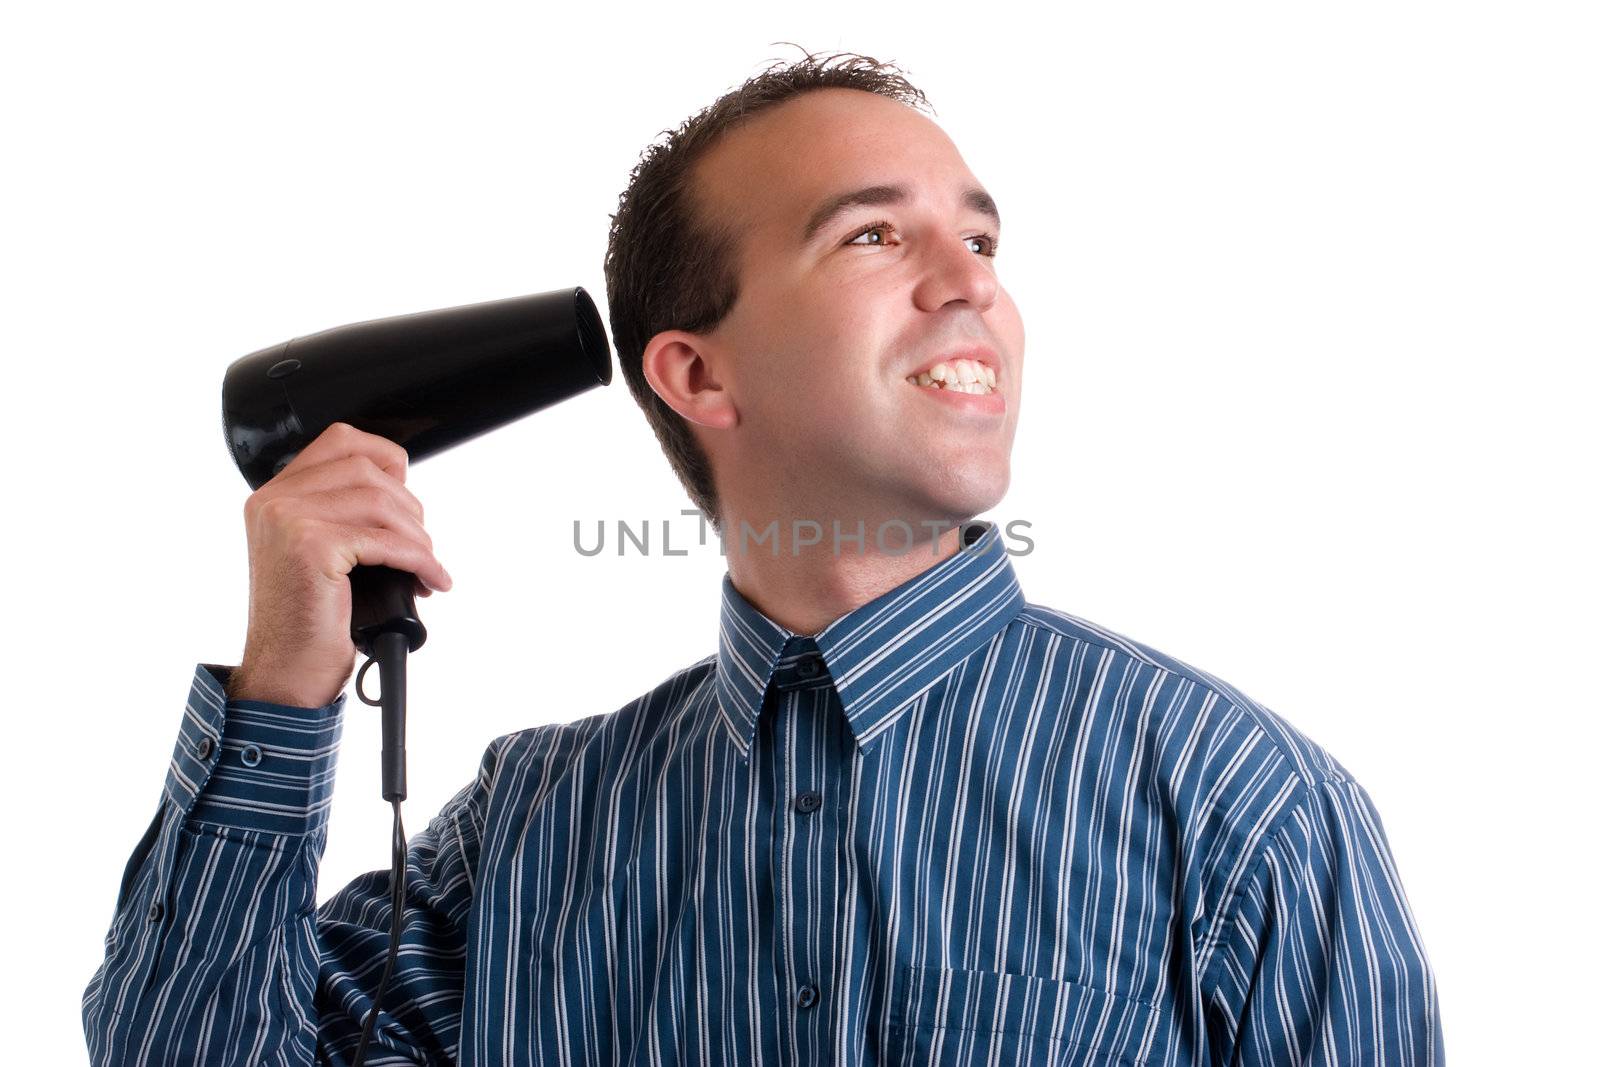 A young man dressed for work and blowdrying his hair, isolated against a white background